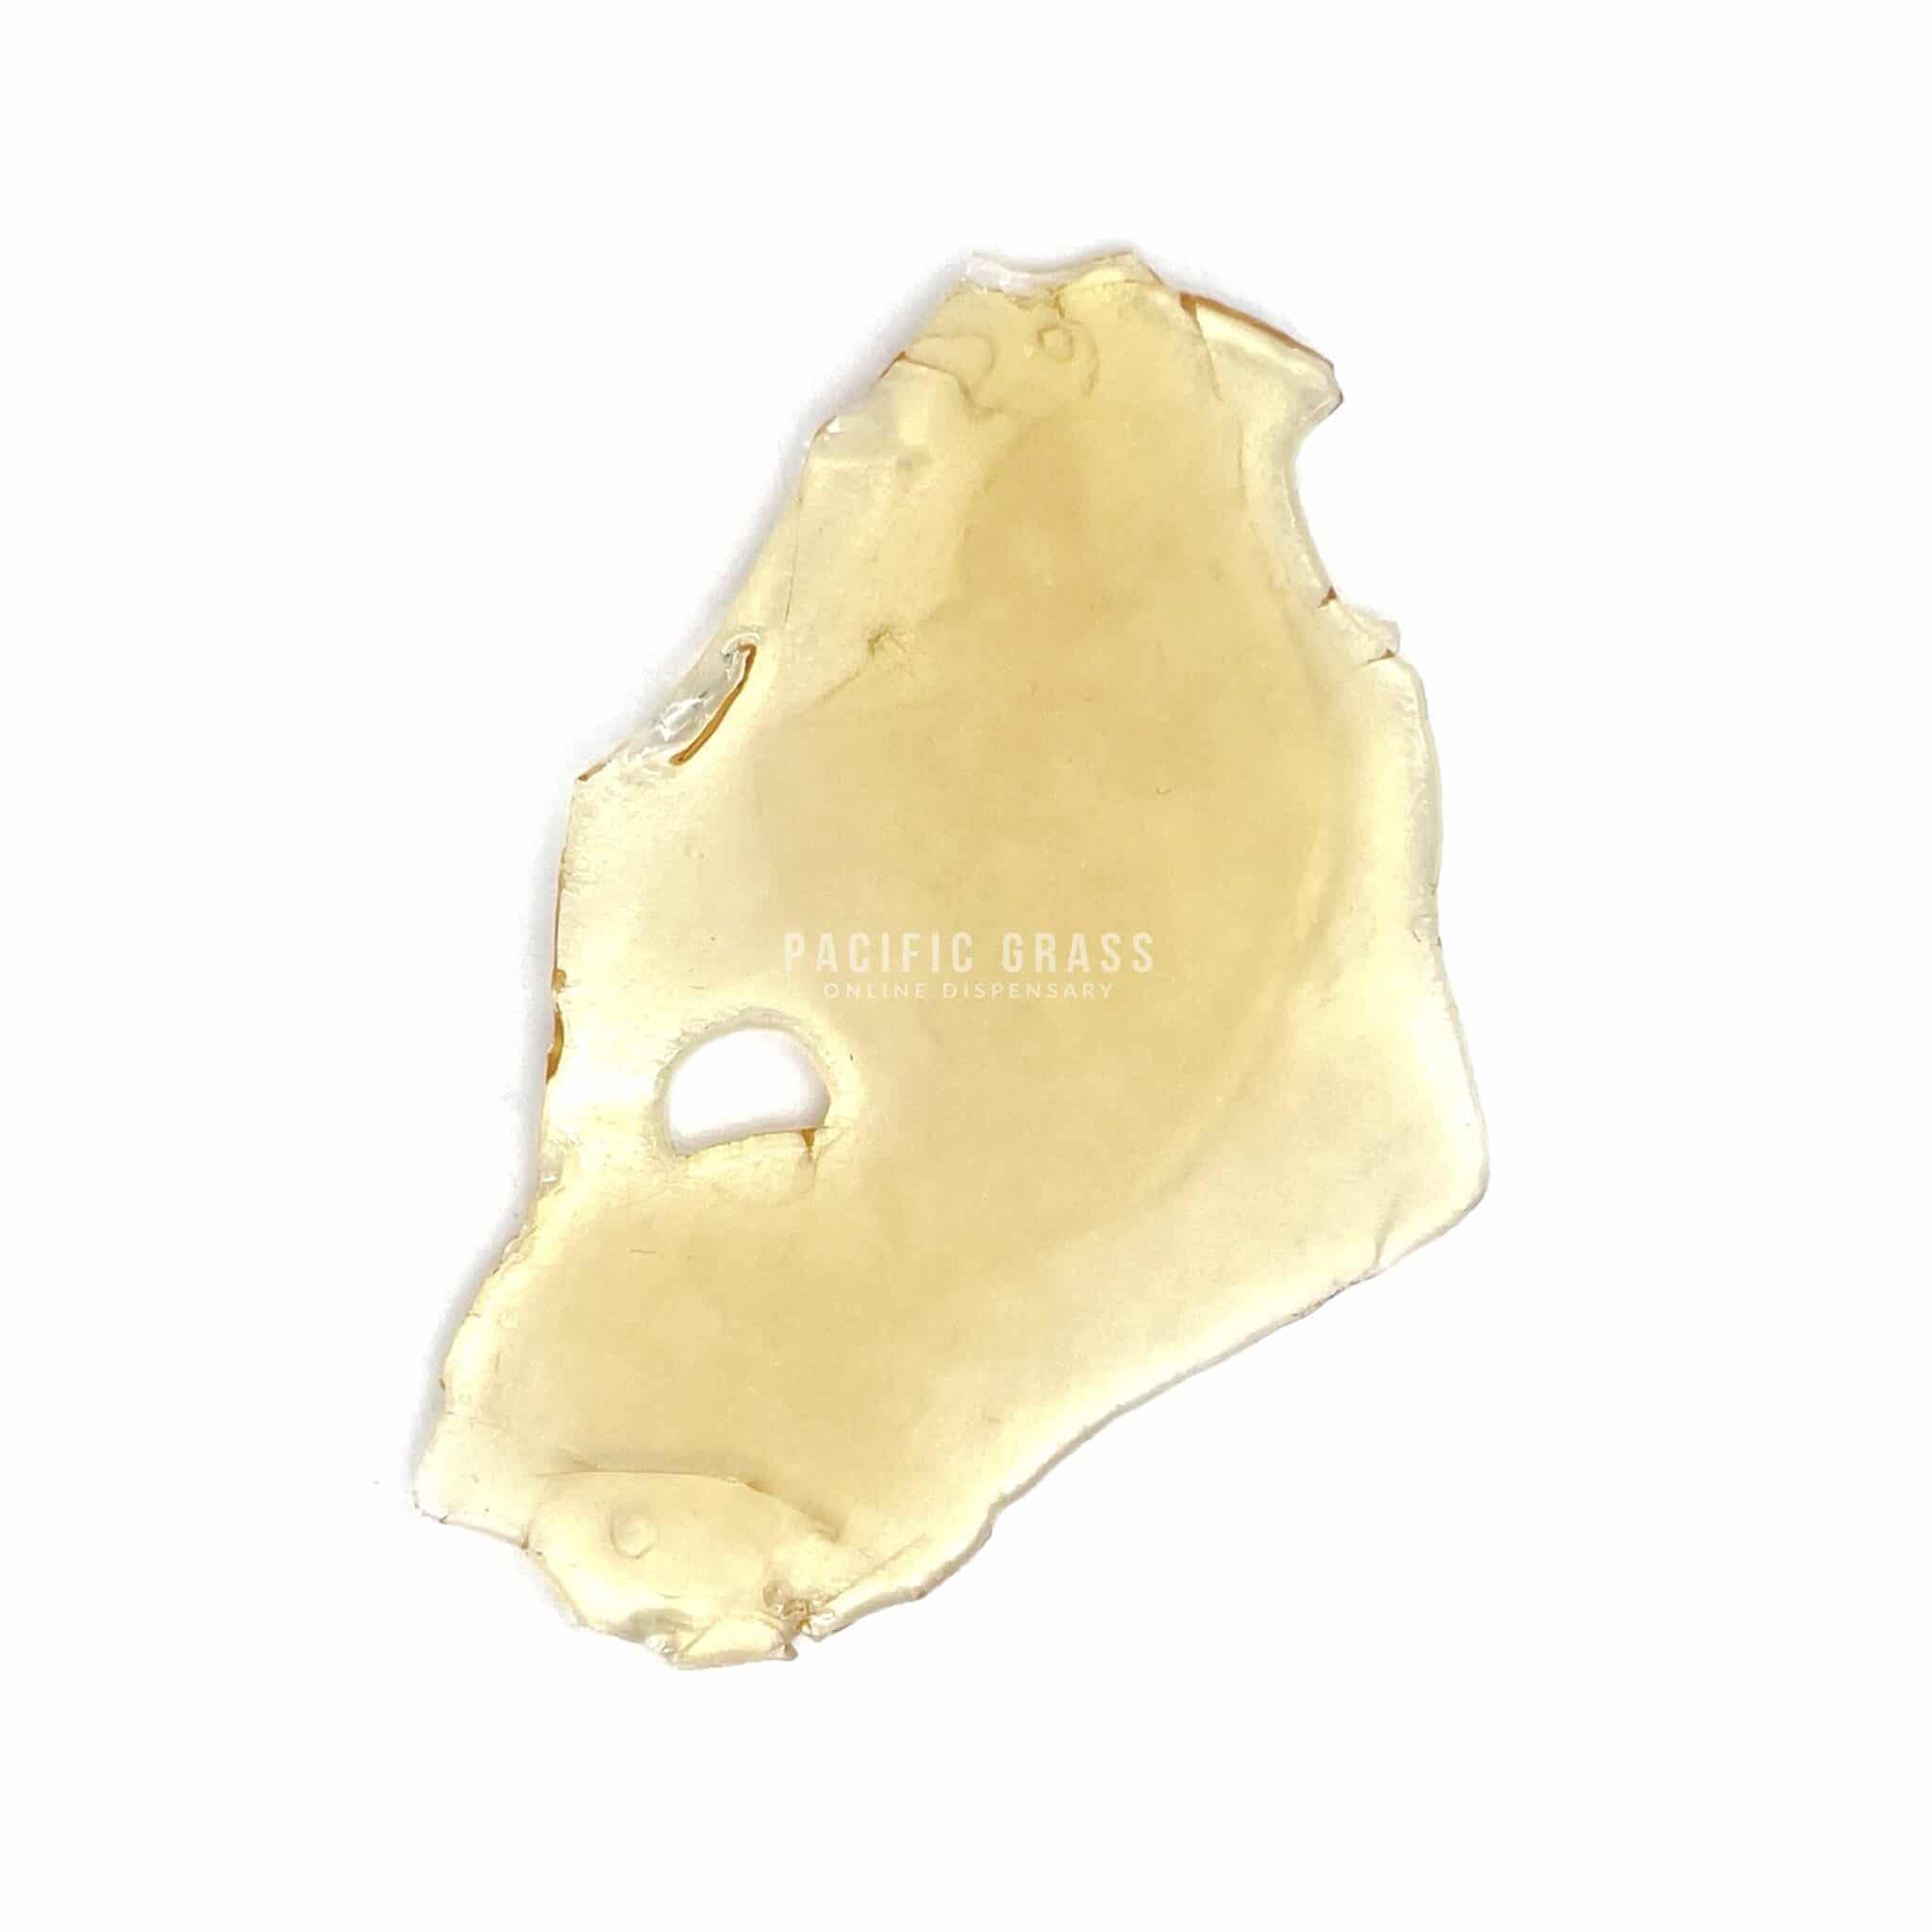 Red Congo Shatter